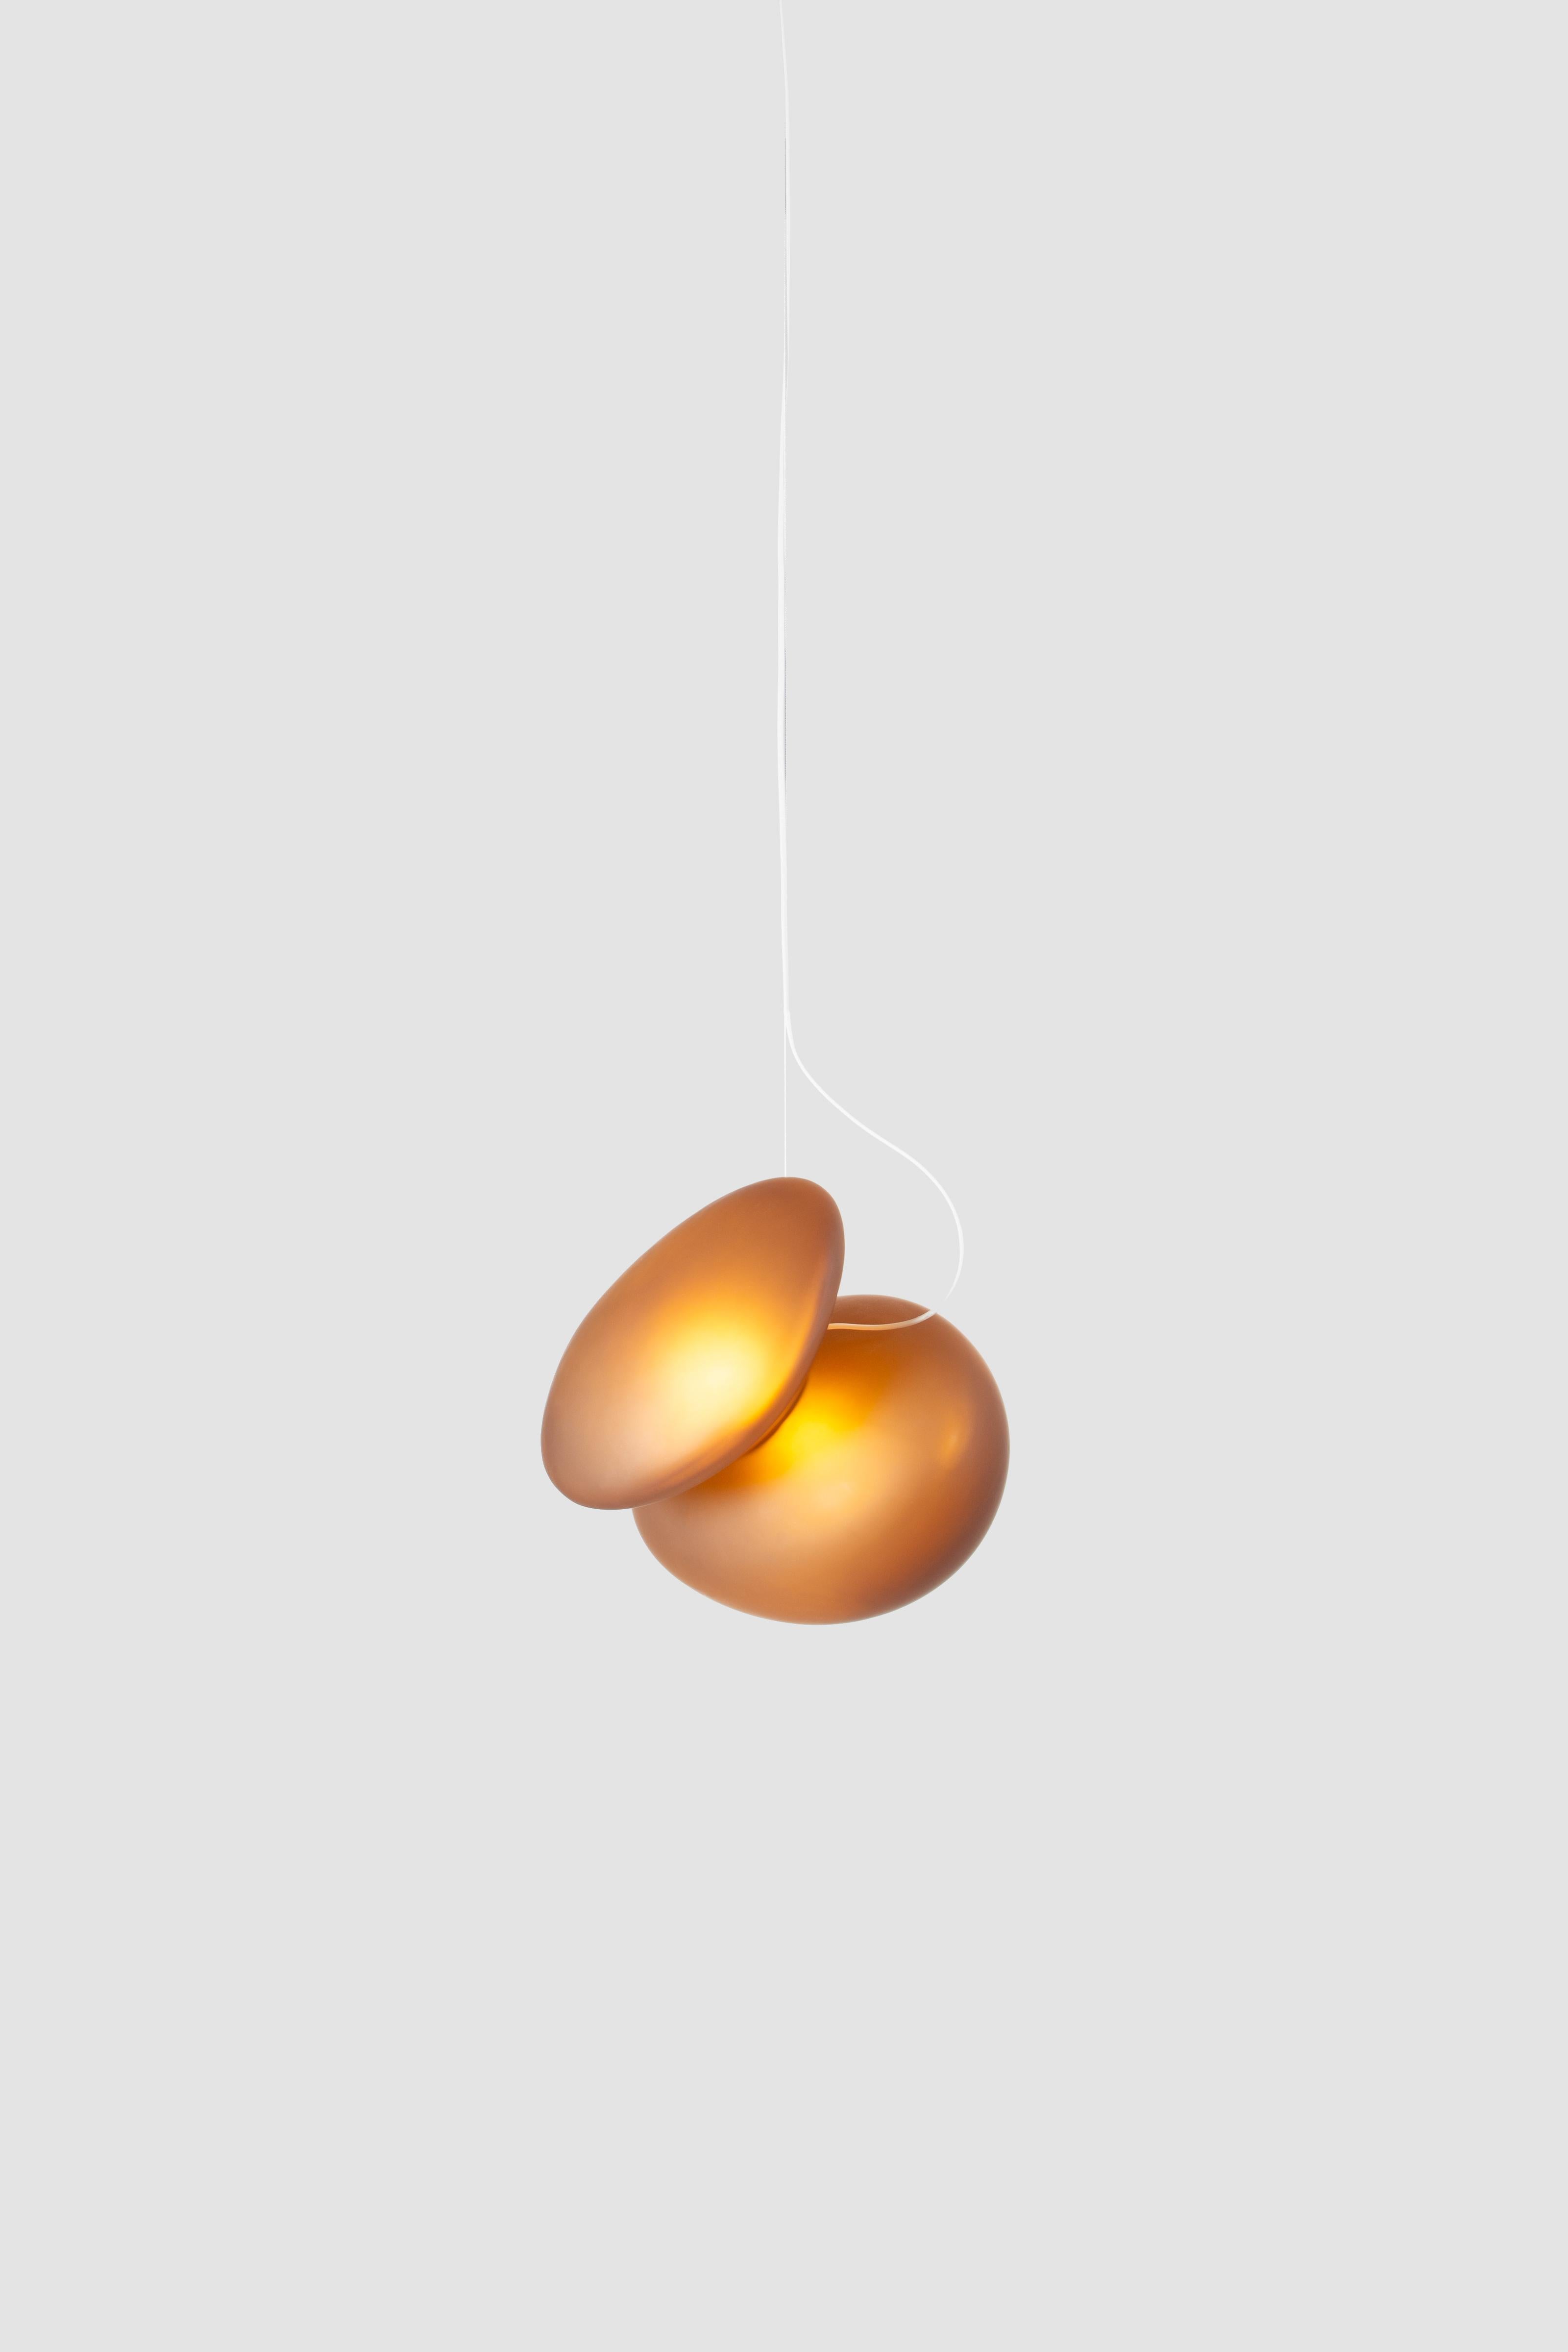 'Pebble' Contemporary pendant lamp 

Model in the picture: 
Color: All citrine
Shapes: A + C

Wire length: 243 cm
Electrical: 14W LED 300ma, 2700K, Dimming: 0–10/ Triac

Available in white pearl, grey slate and yellow citrine. 
Different